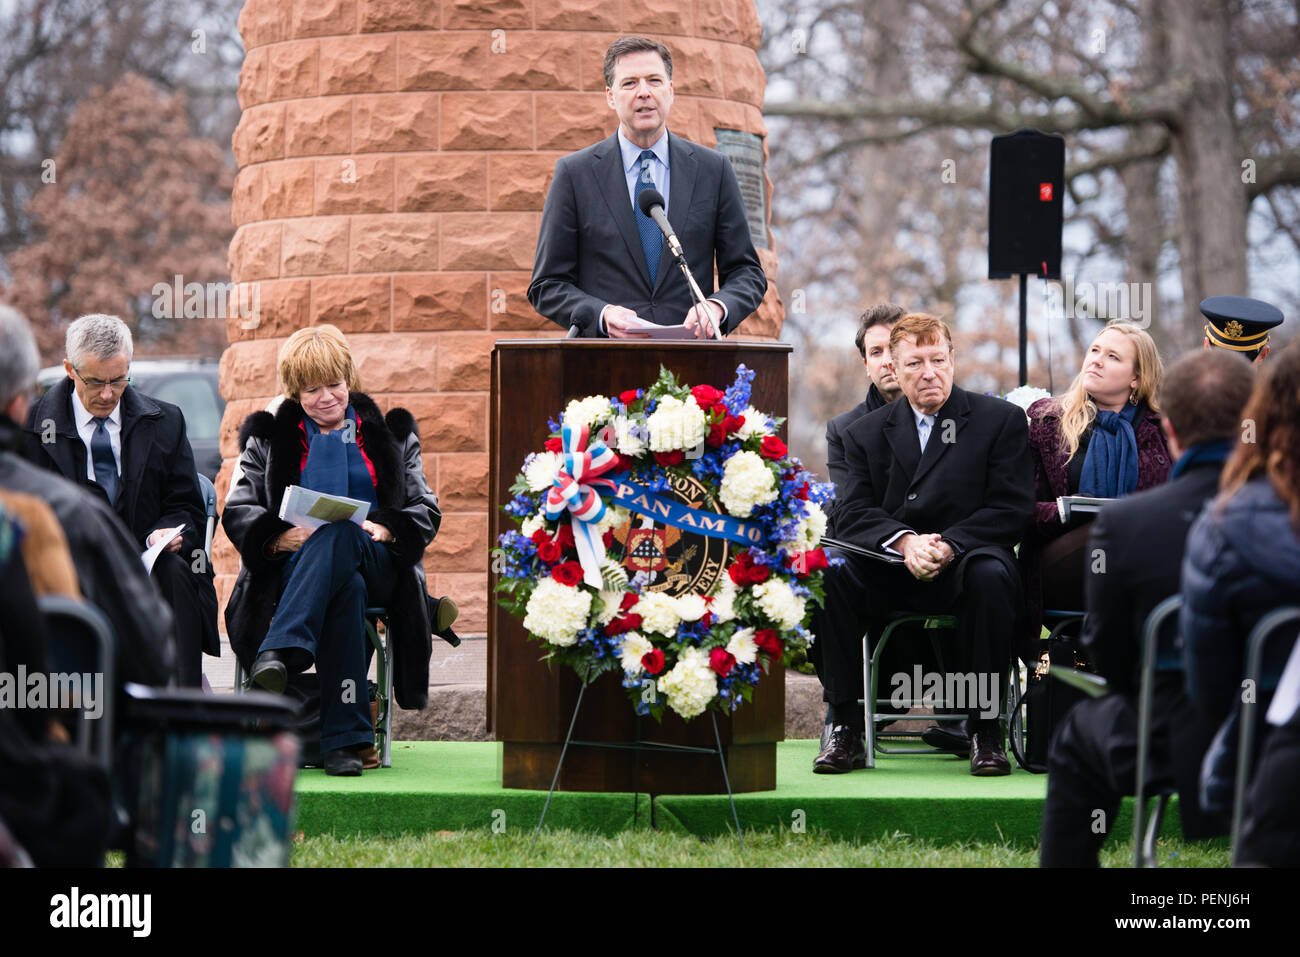 James Comey, director of the Federal Bureau of Investigation, gives remarks during the Pan Am Flight 103 memorial ceremony in Arlington National Cemetery, Dec. 21, 2015, in Arlington, Va. A terrorist’s bomb destroyed the aircraft 27 years ago, in what became known as the “Lockerbie bombing,” killing 243 passengers, 16 crew members and 11 people on the ground. (U.S. Army photo by Rachel Larue/Arlington National Cemetery/released) Stock Photo